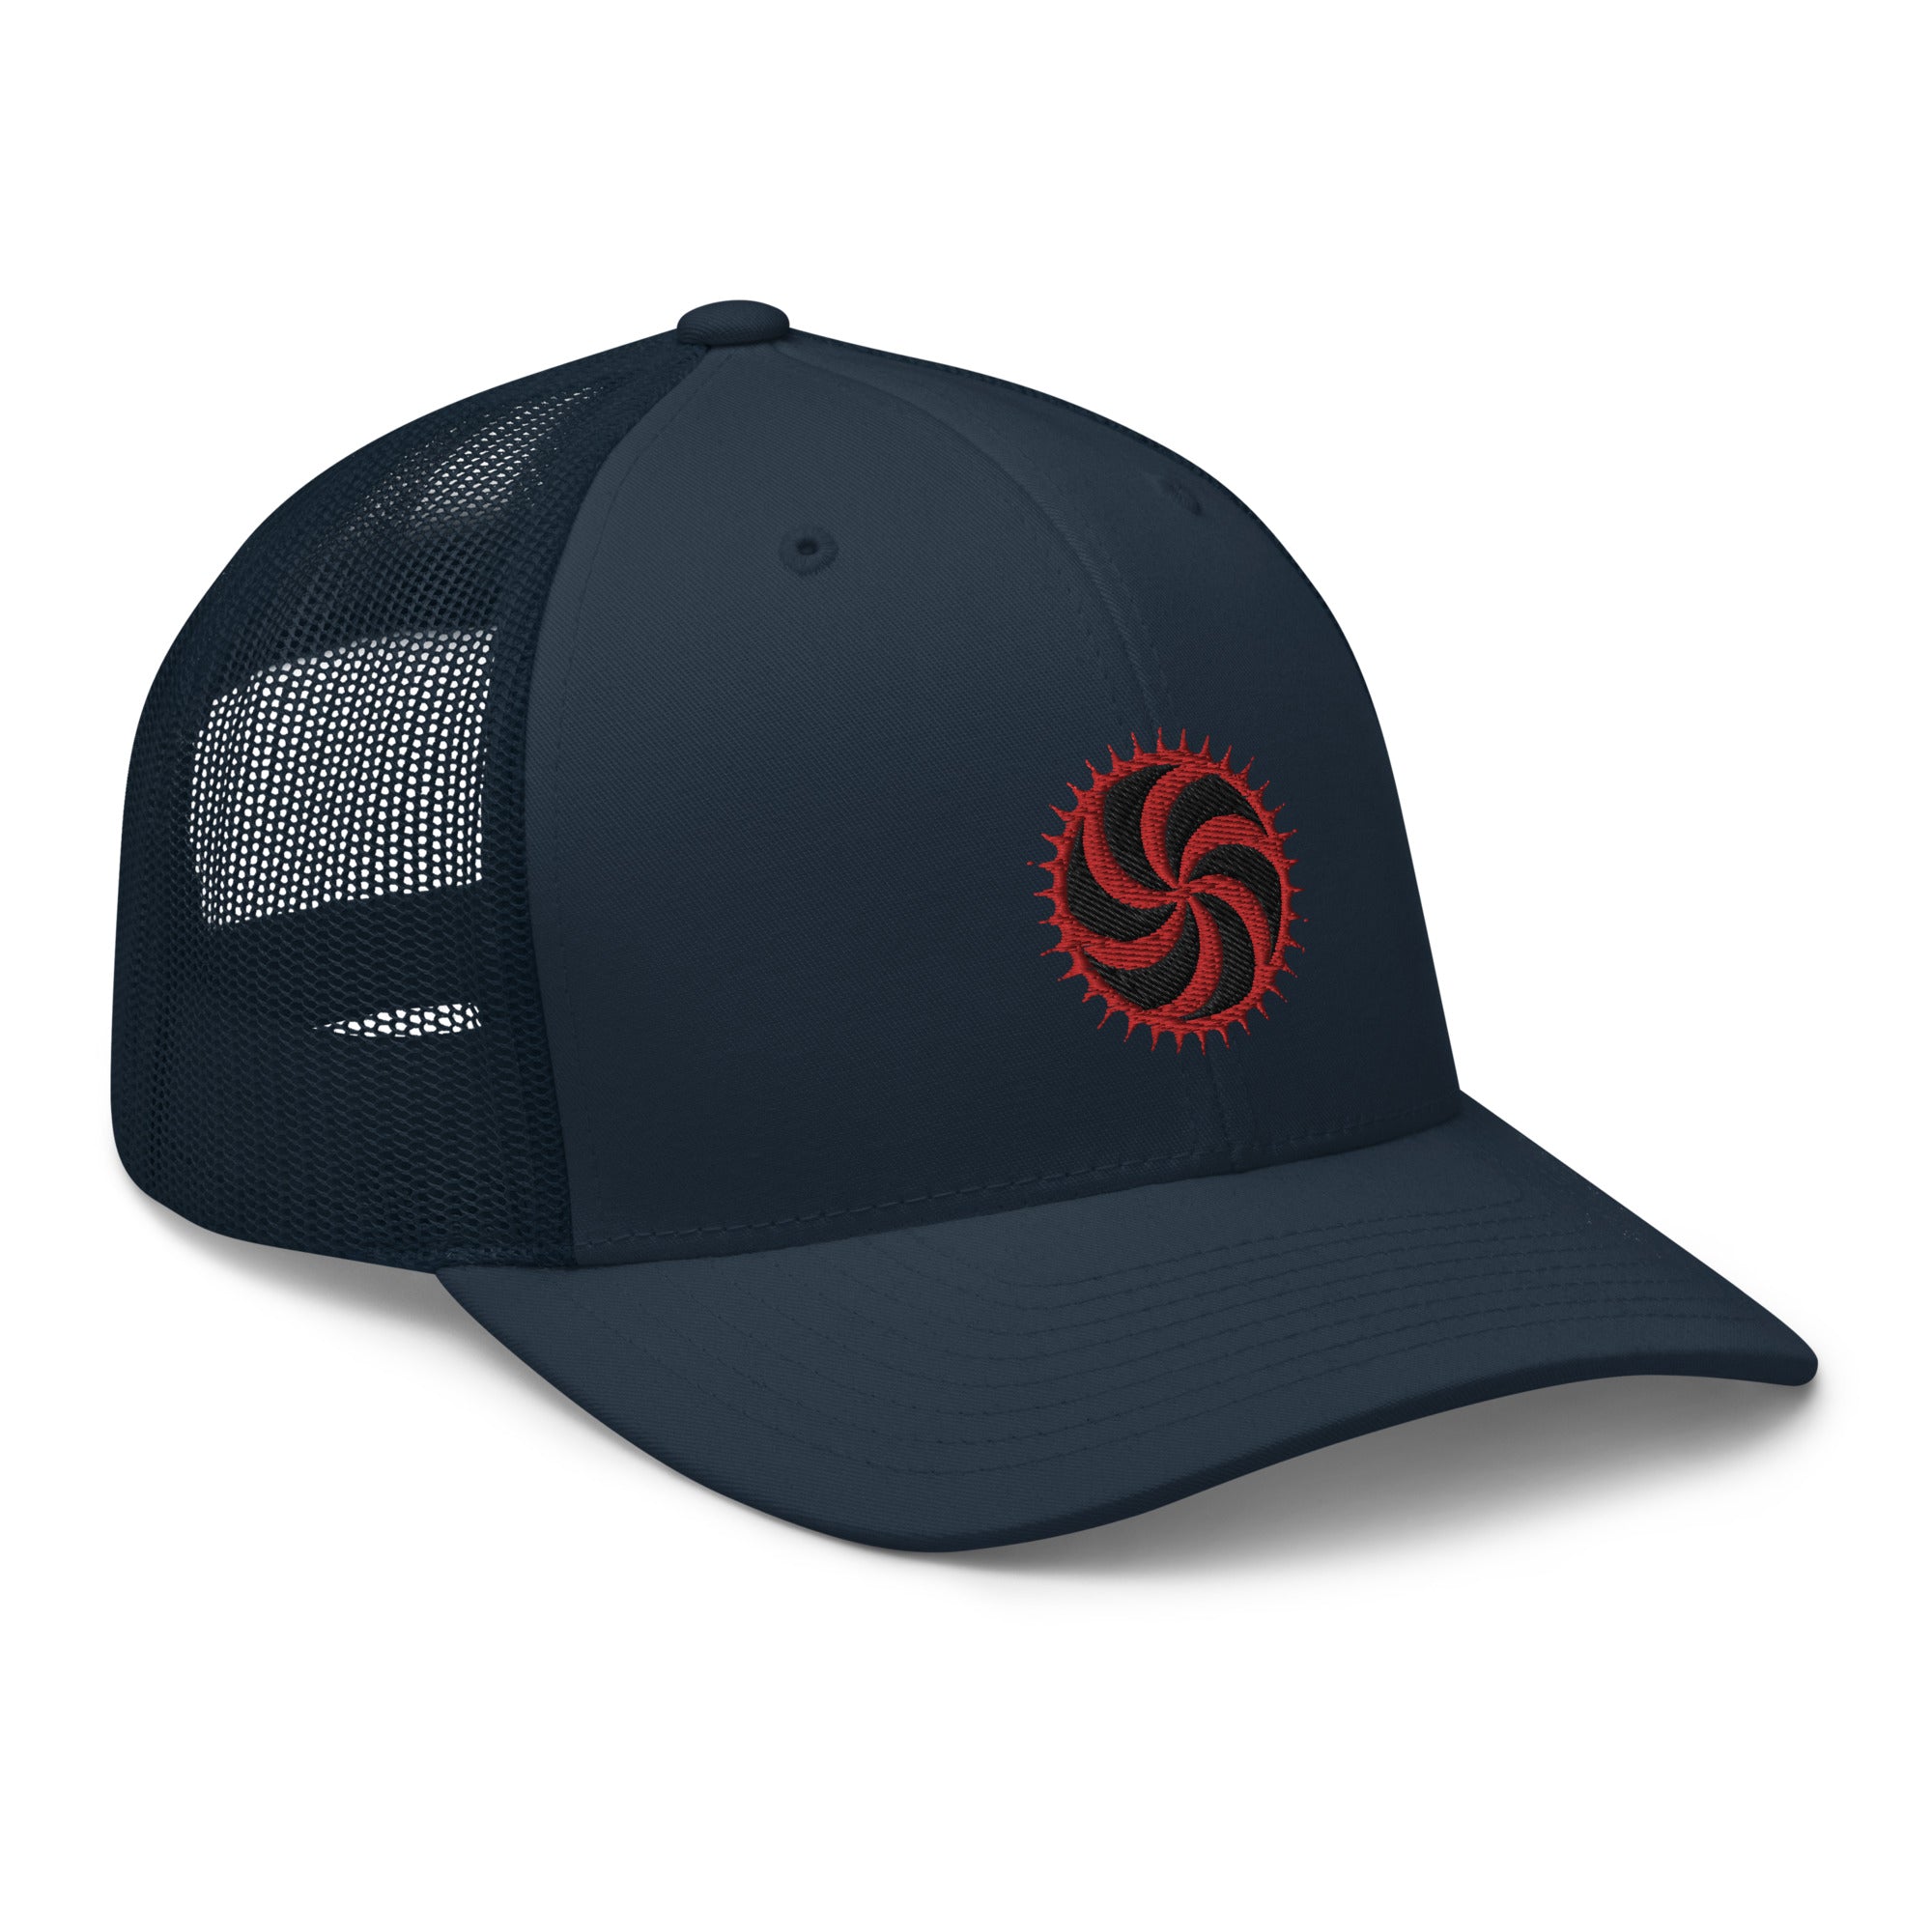 Red Deadly Swirl Spike Symbol Embroidered Trucker Cap Snapback Hat